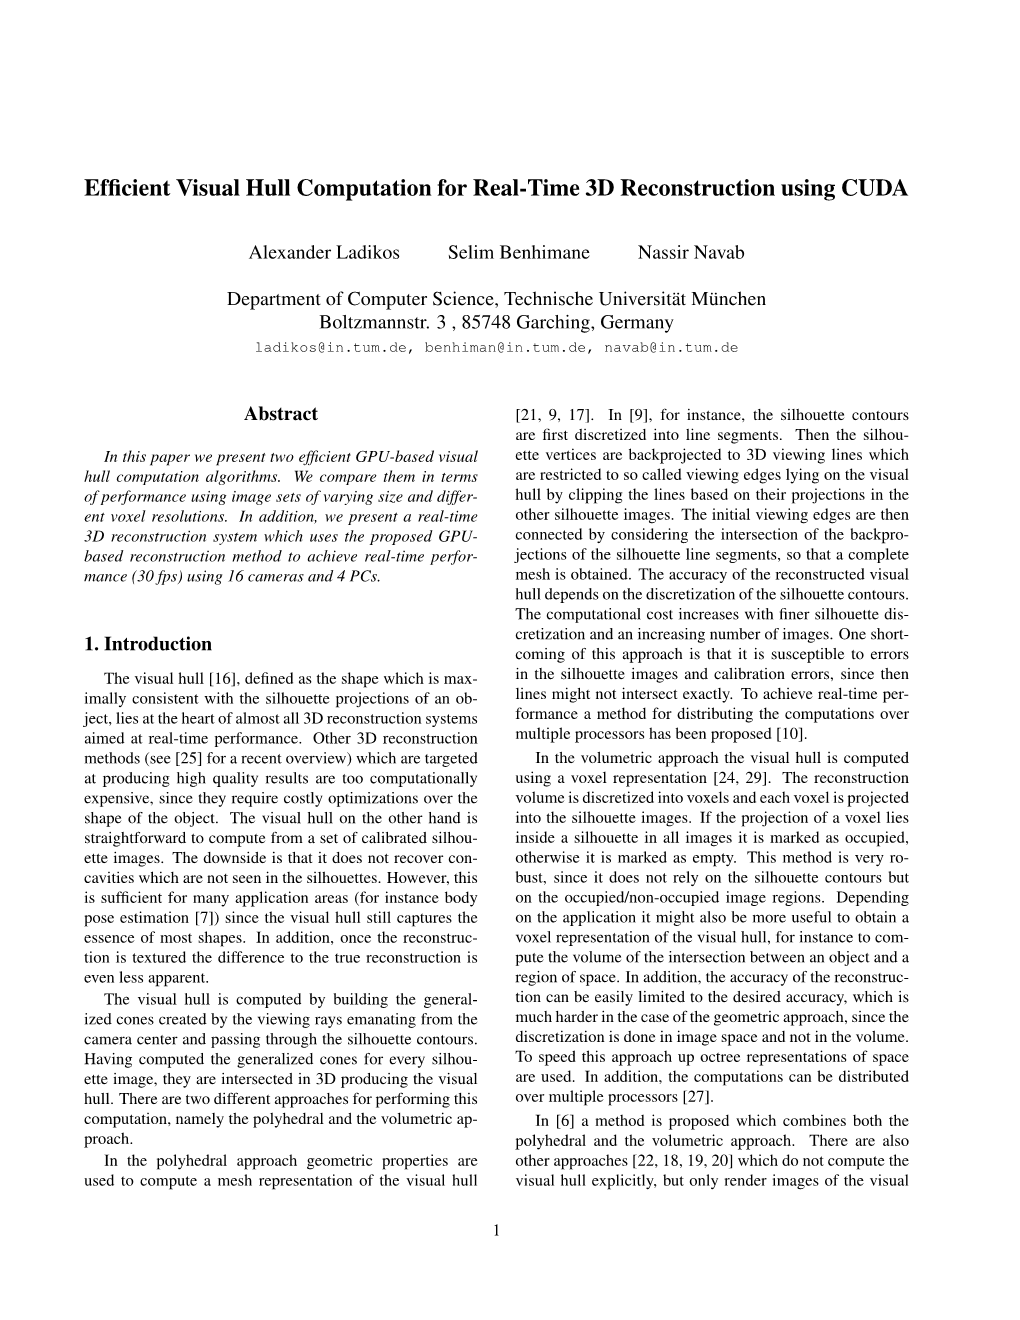 Efficient Visual Hull Computation for Real-Time 3D Reconstruction Using